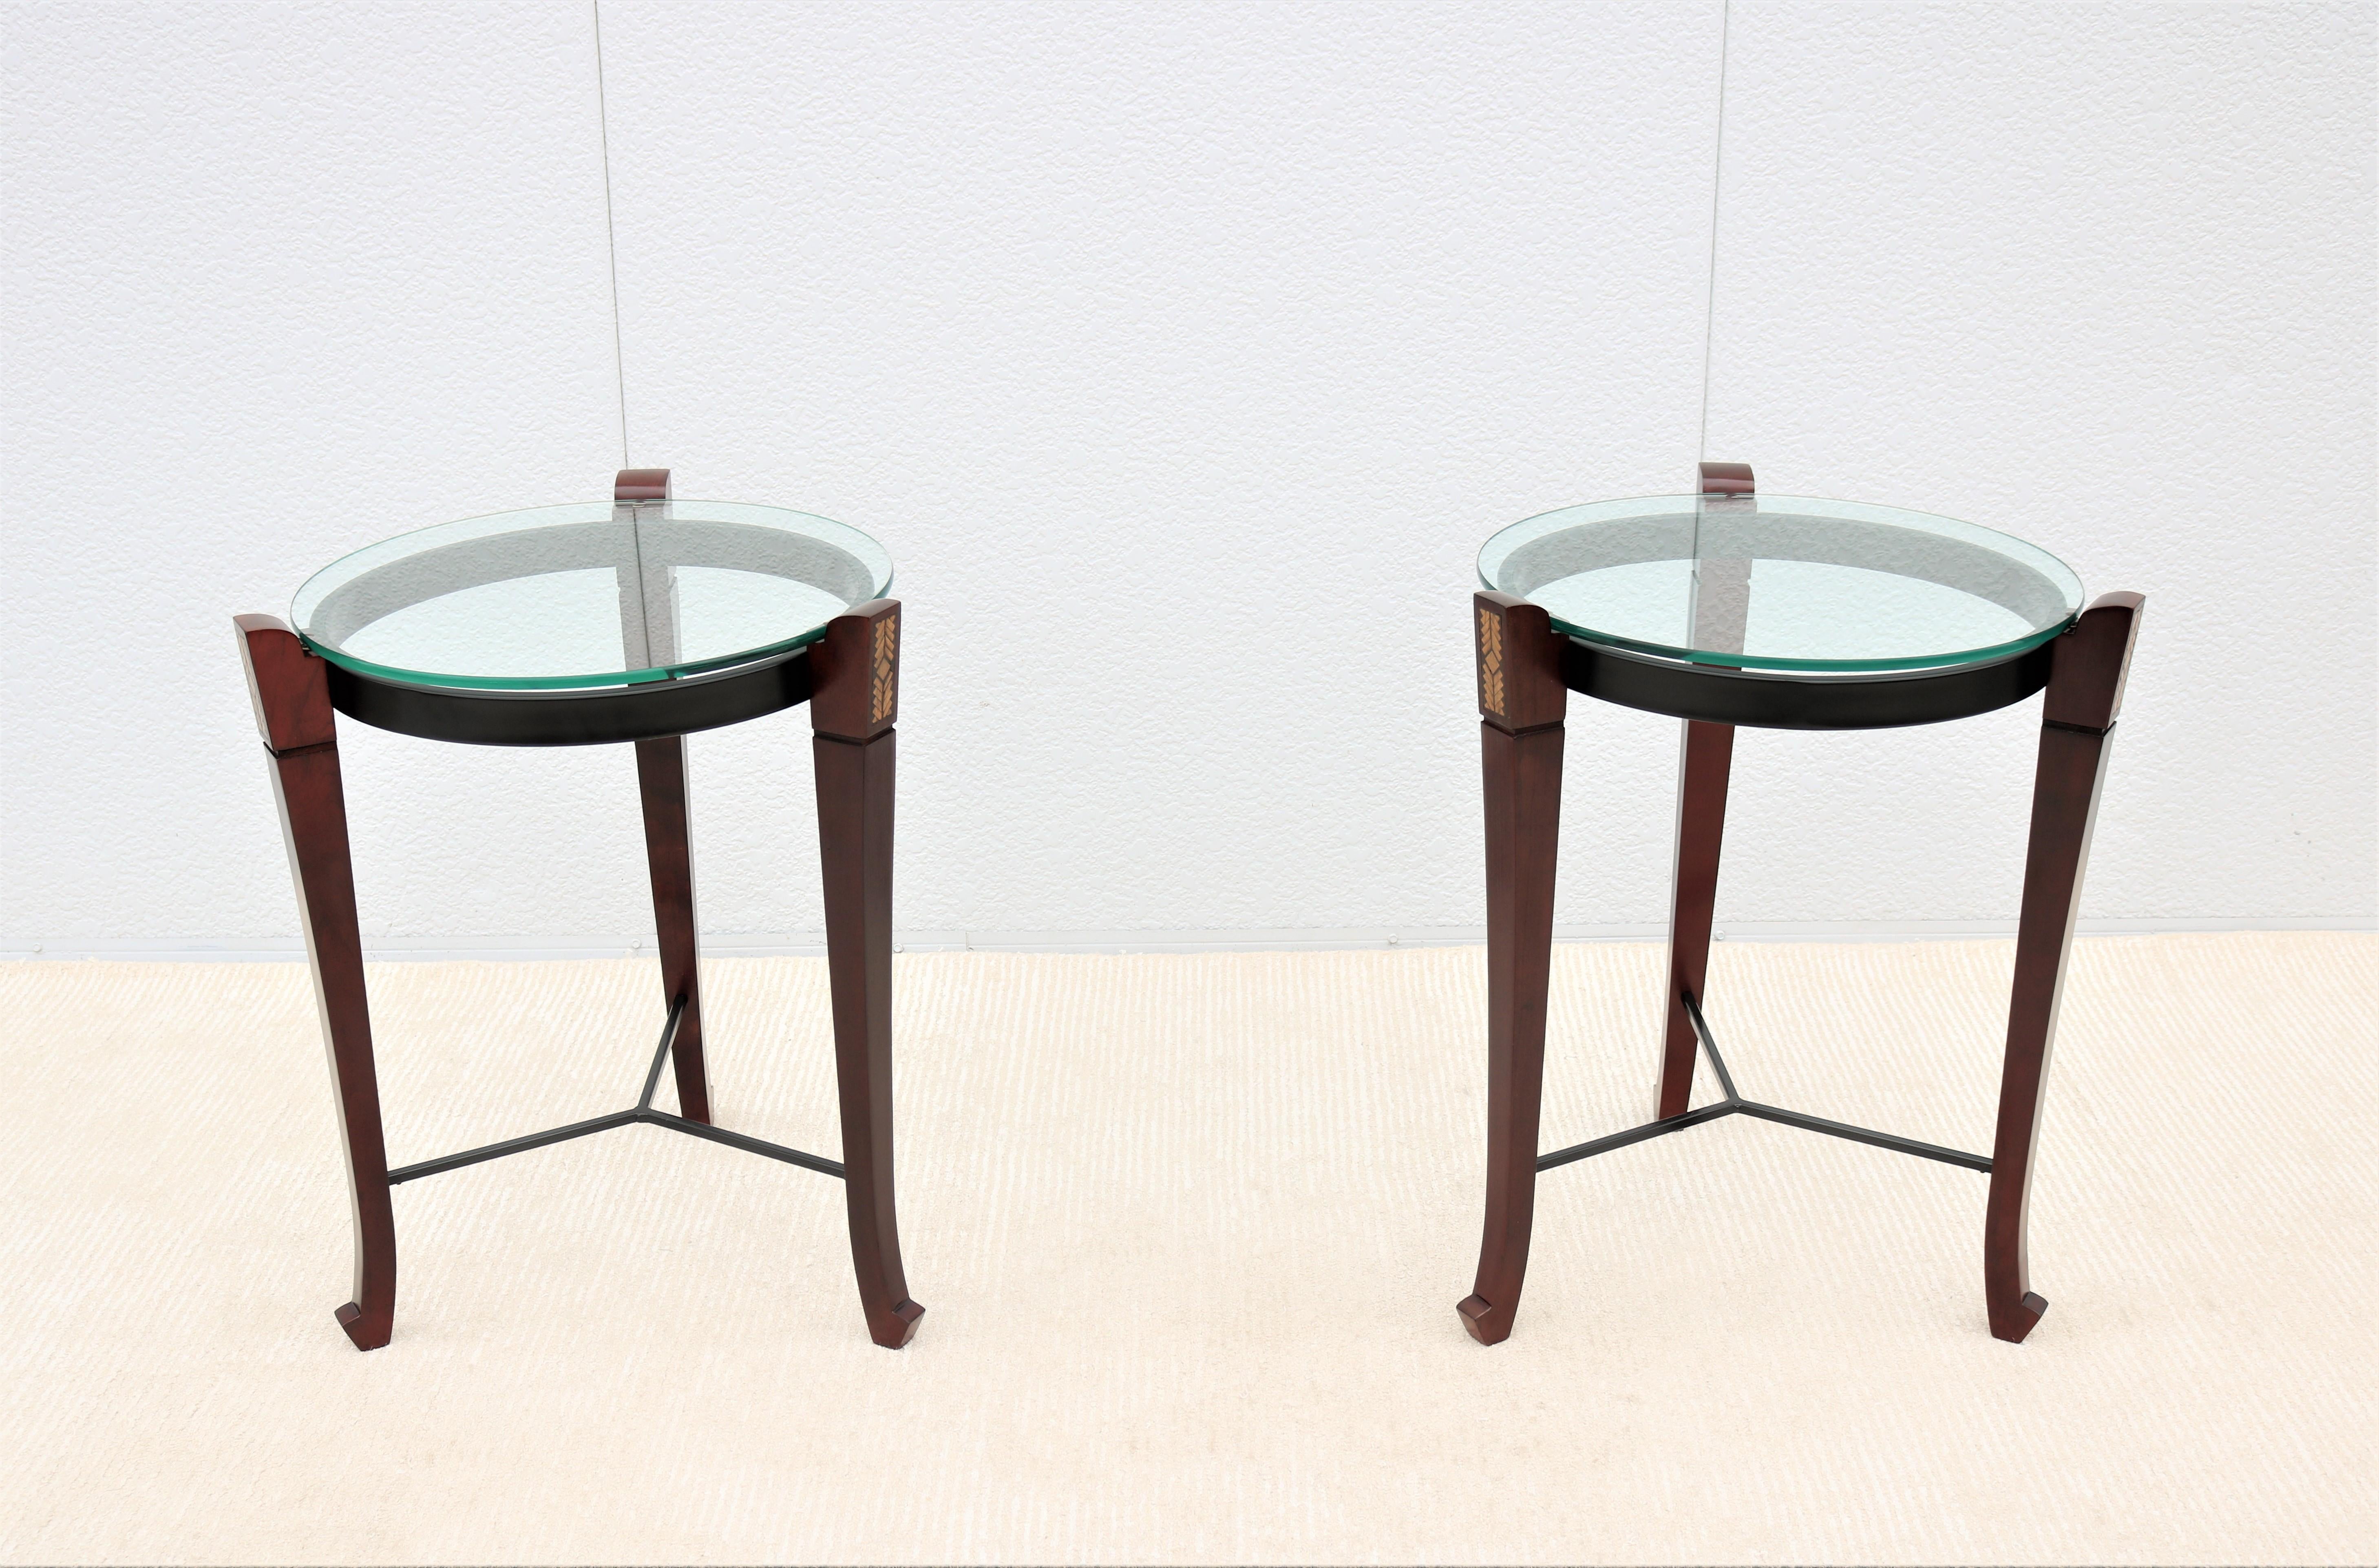 20th Century Traditional Cherry Wood and Transparent Glass Round Side Tables - a Pair For Sale